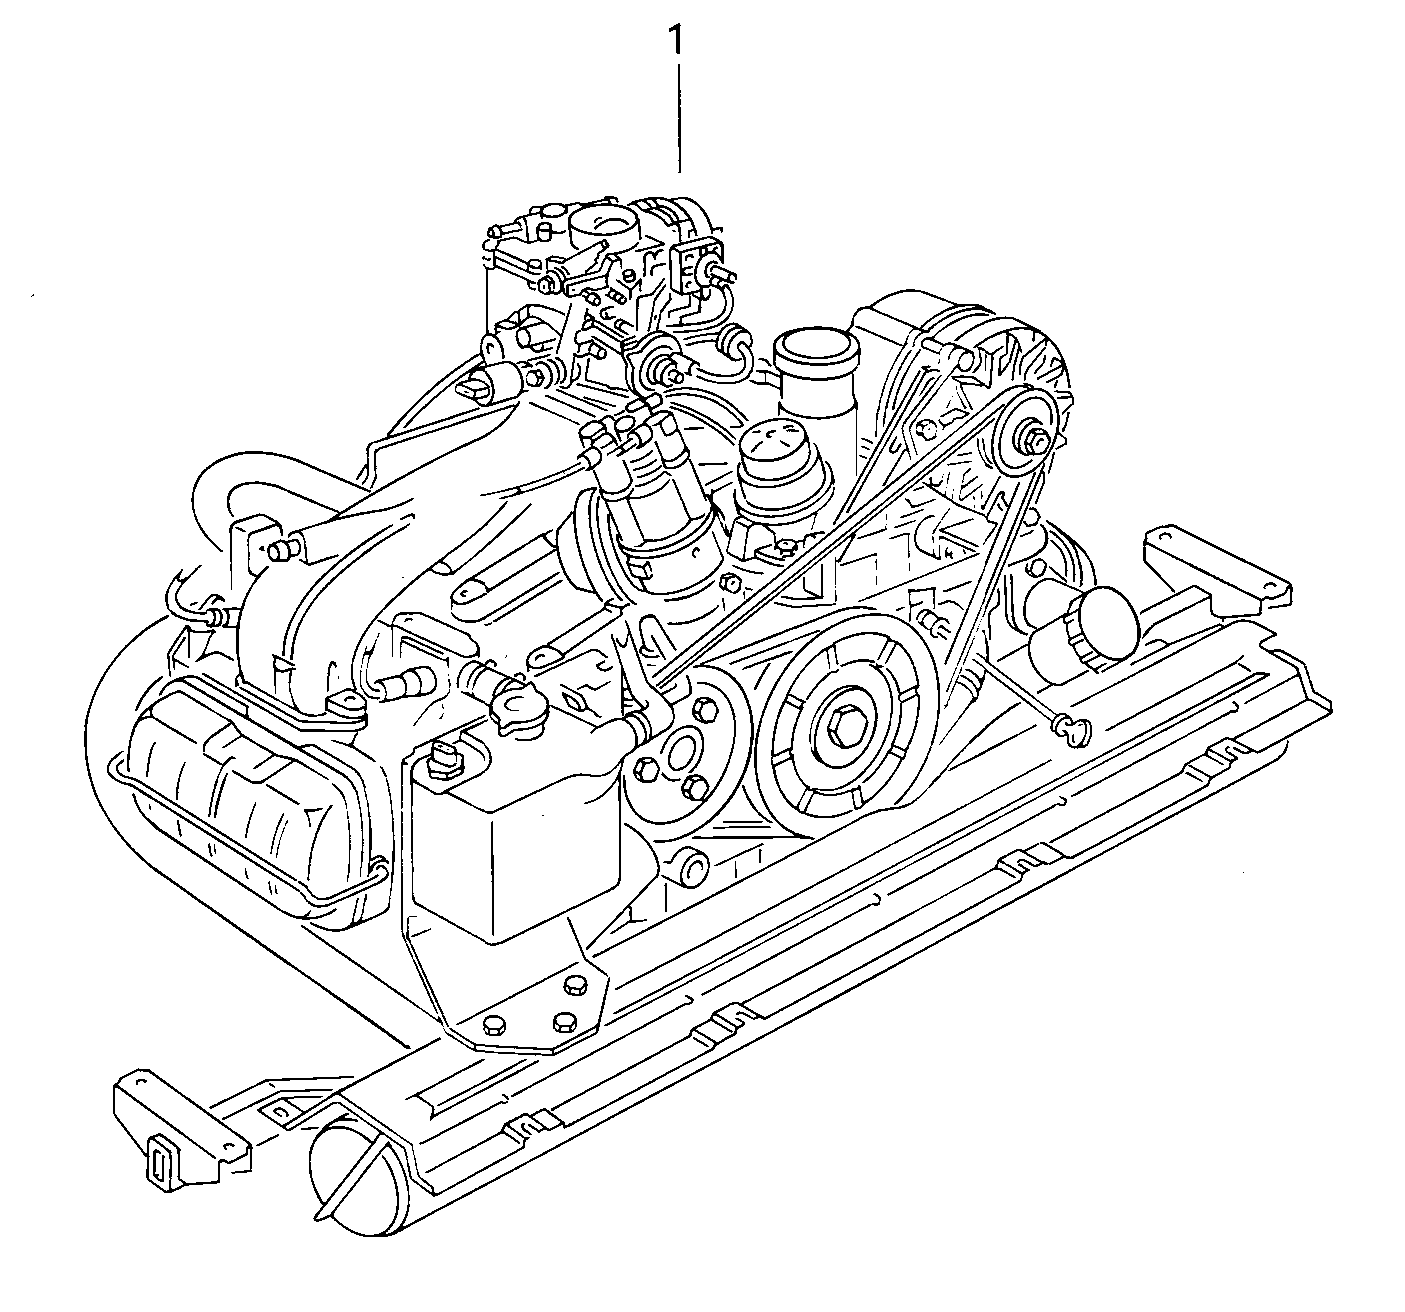 base engine - Typ 2/syncro(T2)  